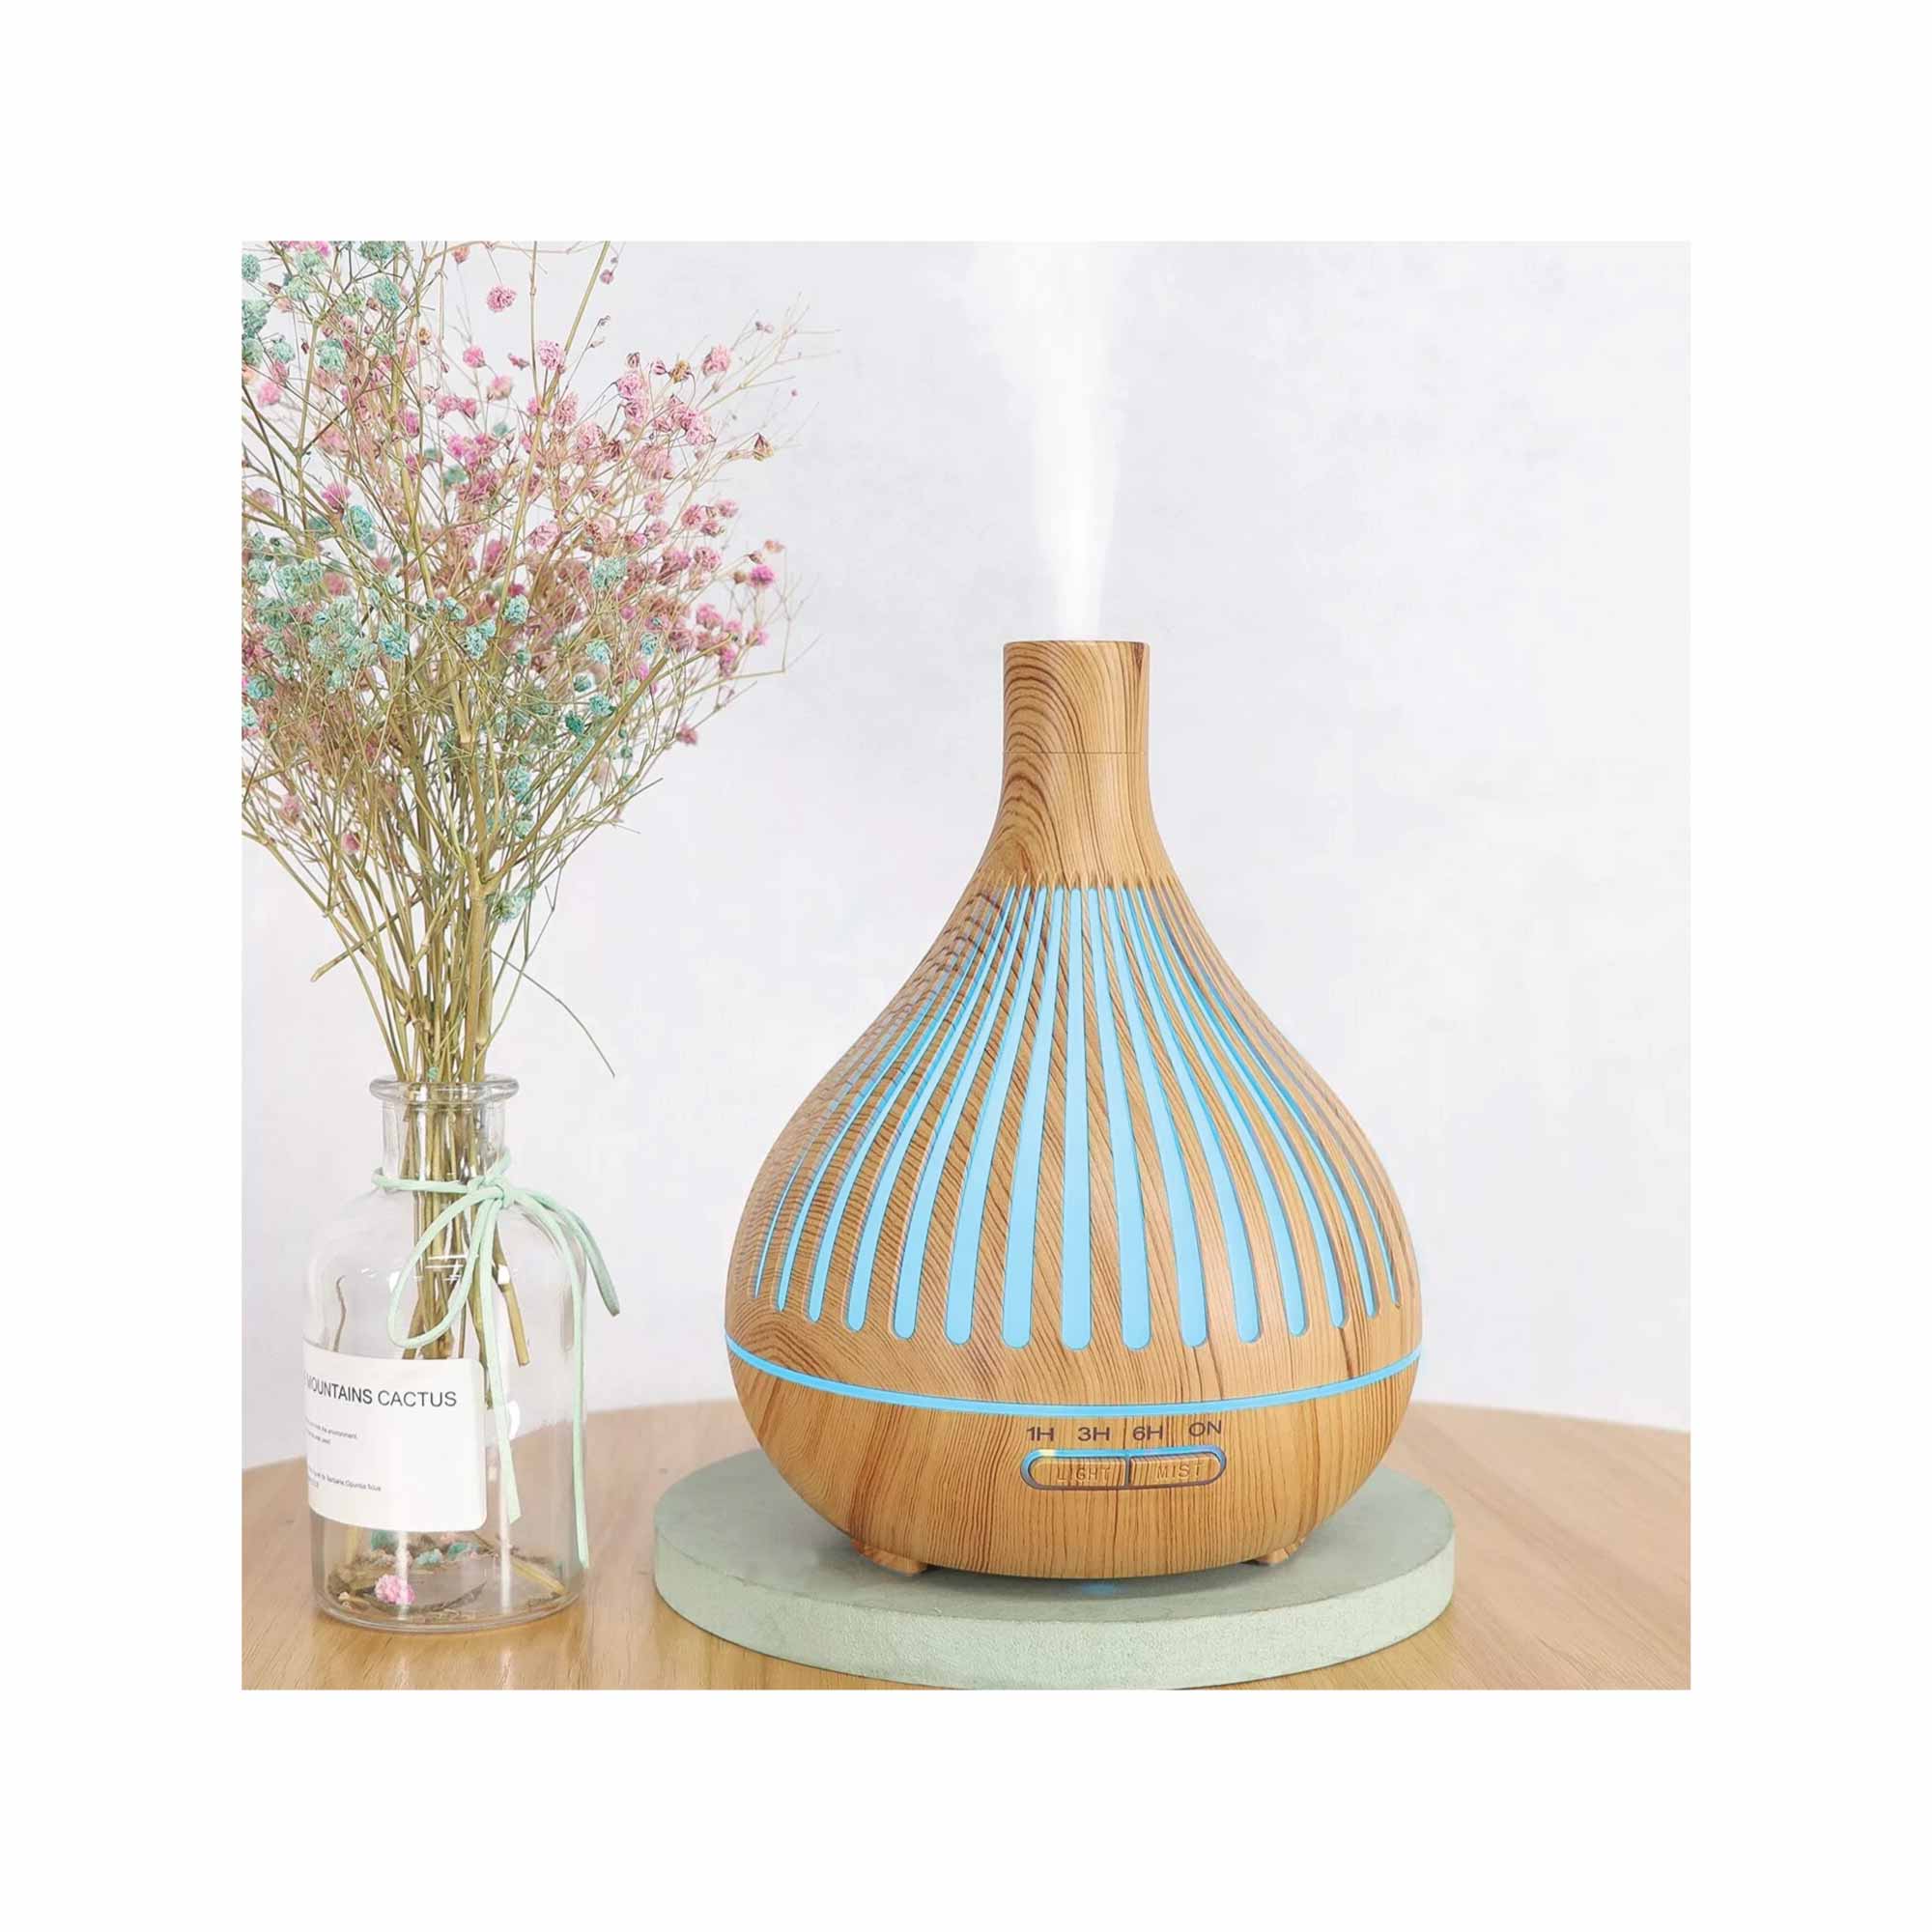 Essential Oil Aroma Diffuser and Remote - 400ml Narrow Top Wood Mist Humidifier